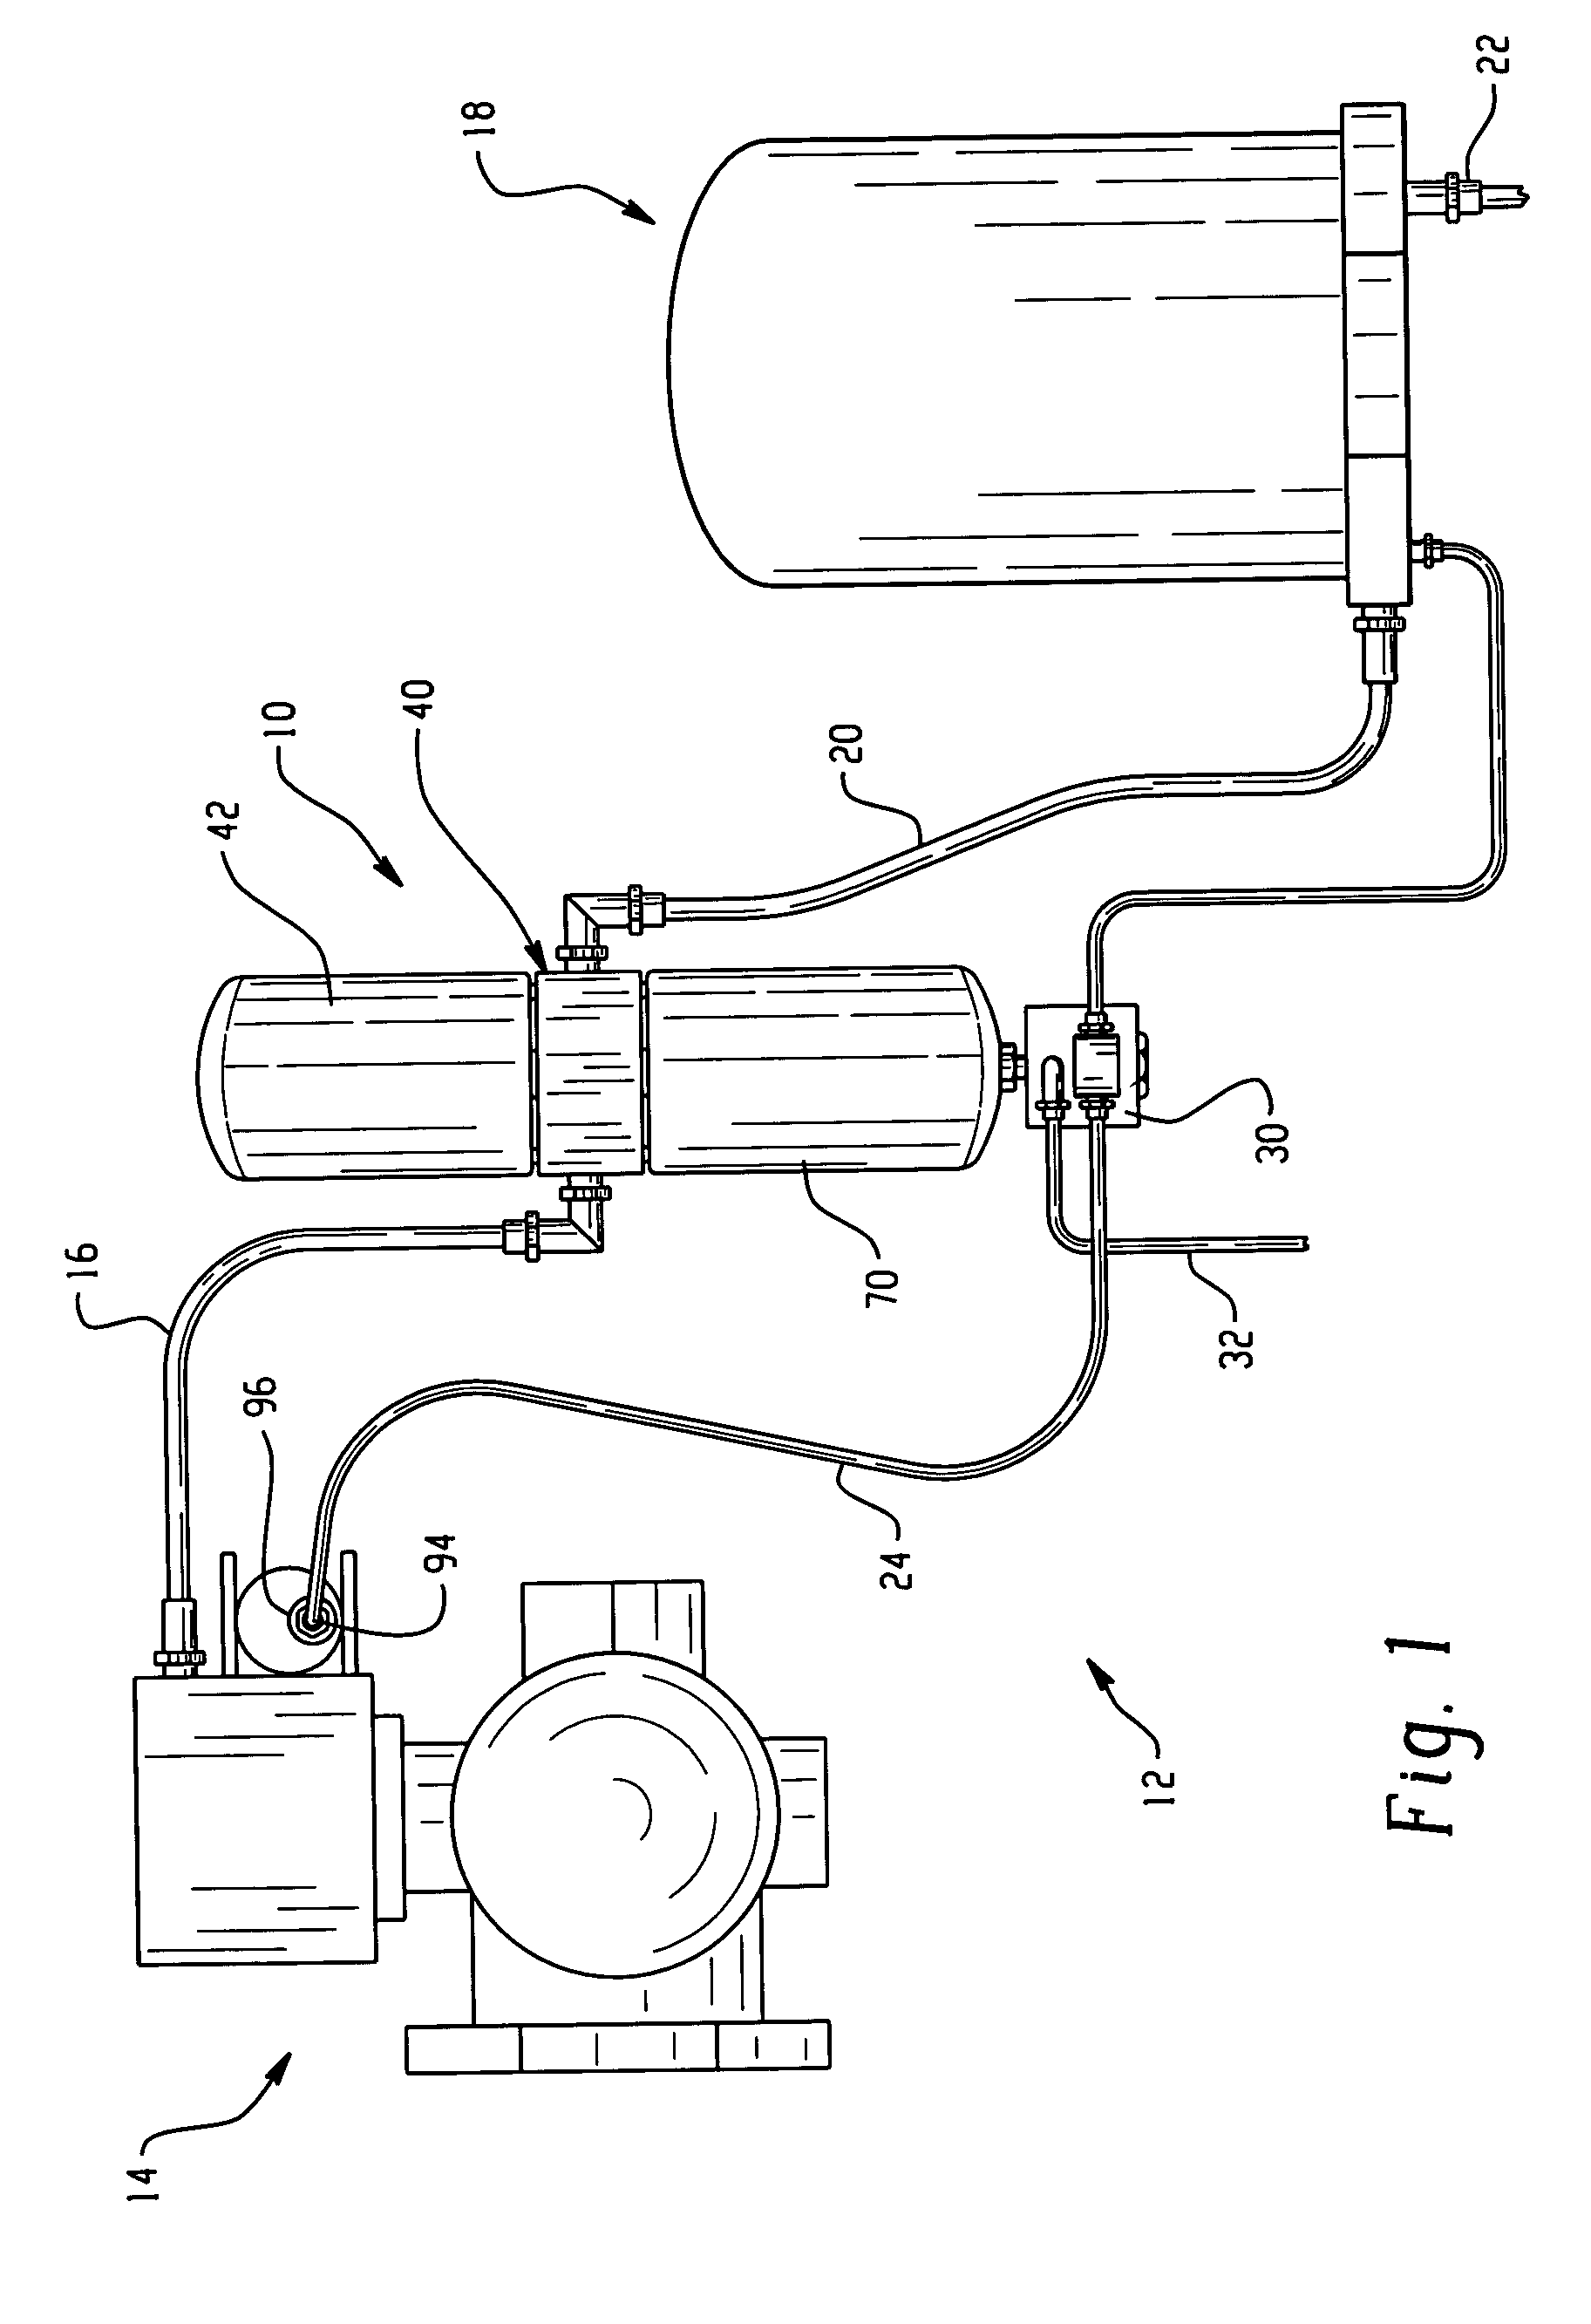 Oil separator for vehicle air system